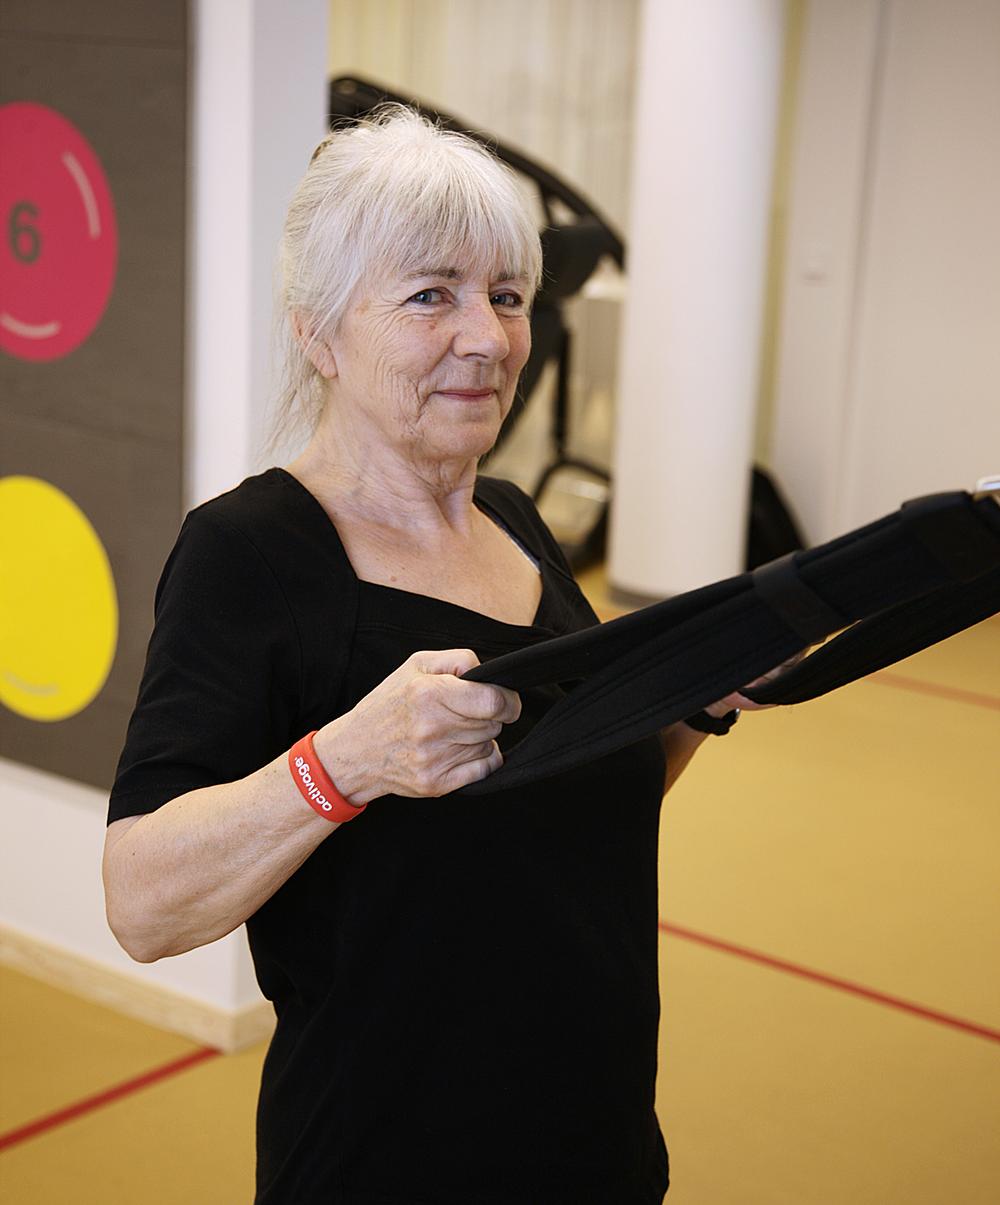 Most Activage members are in their 70s and had never been to a gym before